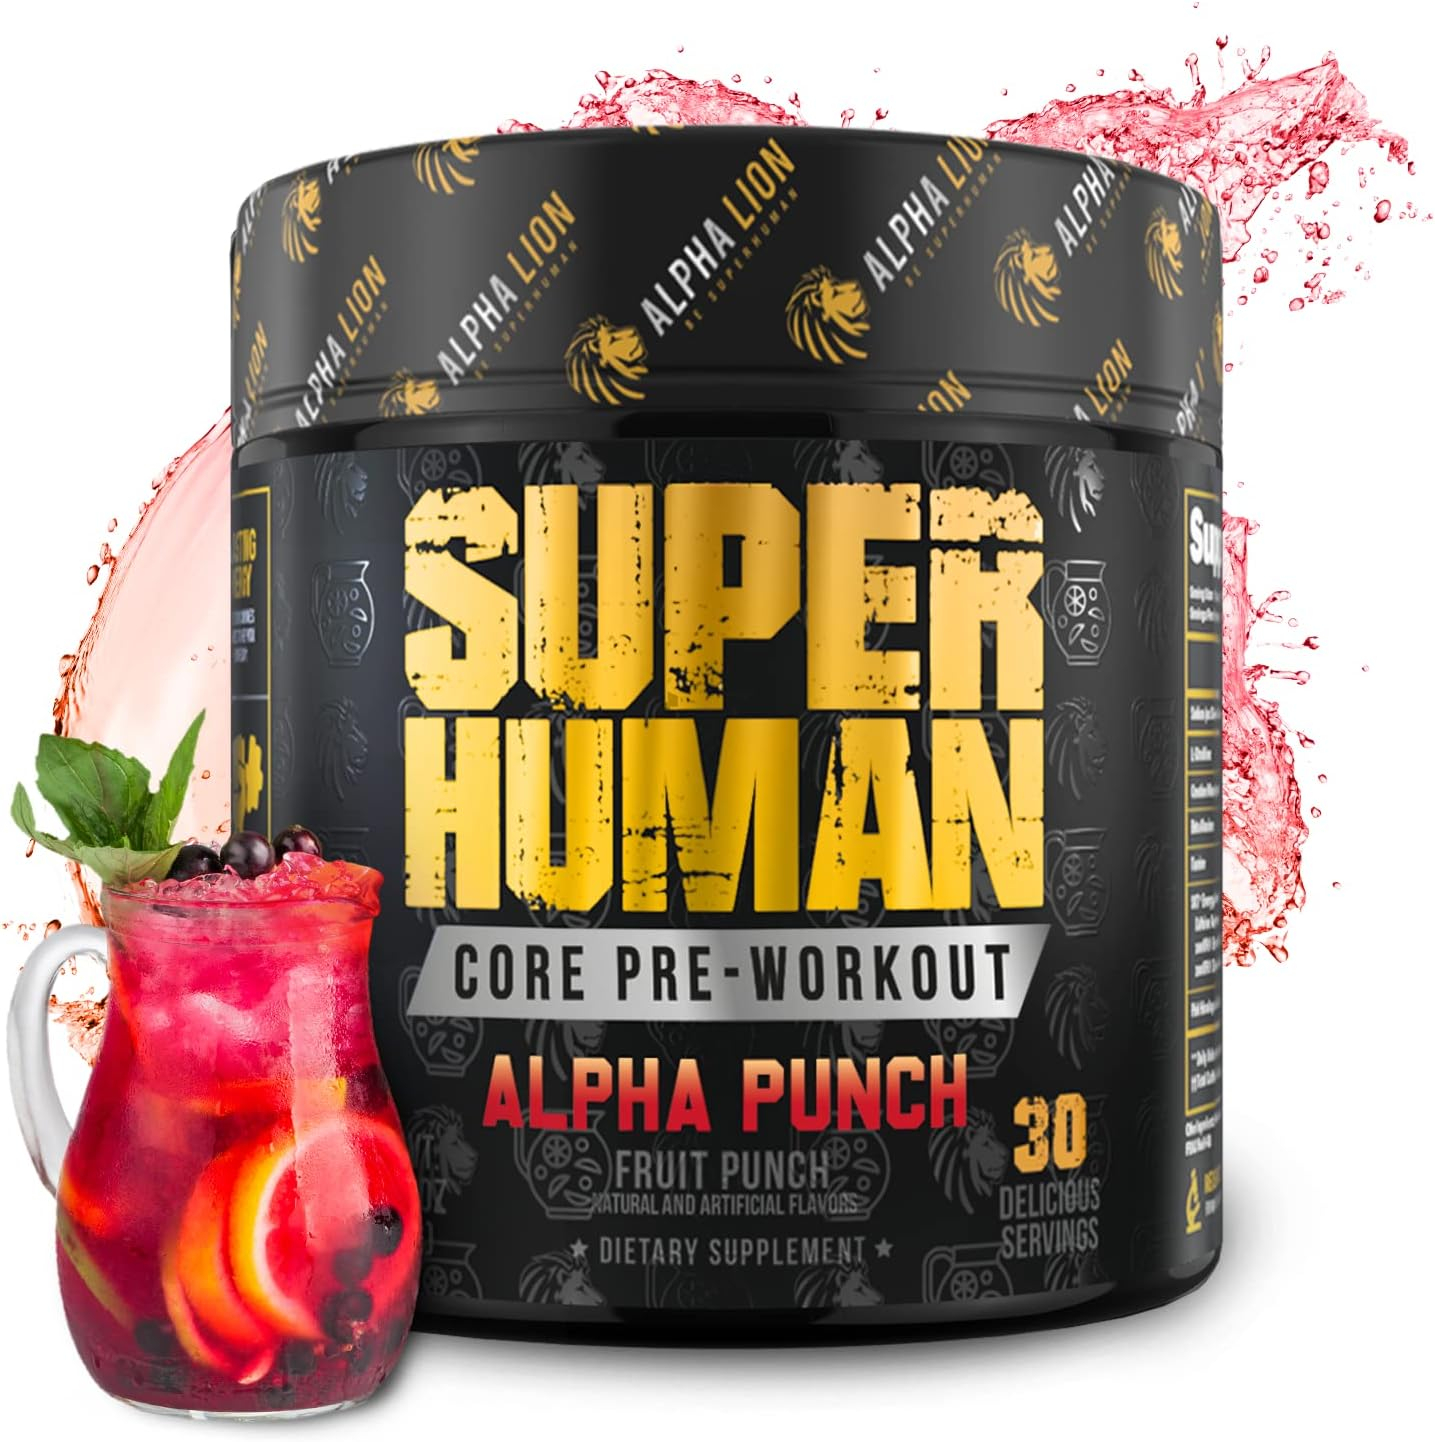 ALPHA LION Core Pre Workout Powder with Creatine for Performance, Beta Alanine for Muscle, L-Citrulline for Pump  Tri-Source Caffeine for Sustained Energy (30 Servings, Fruit Punch Flavor)